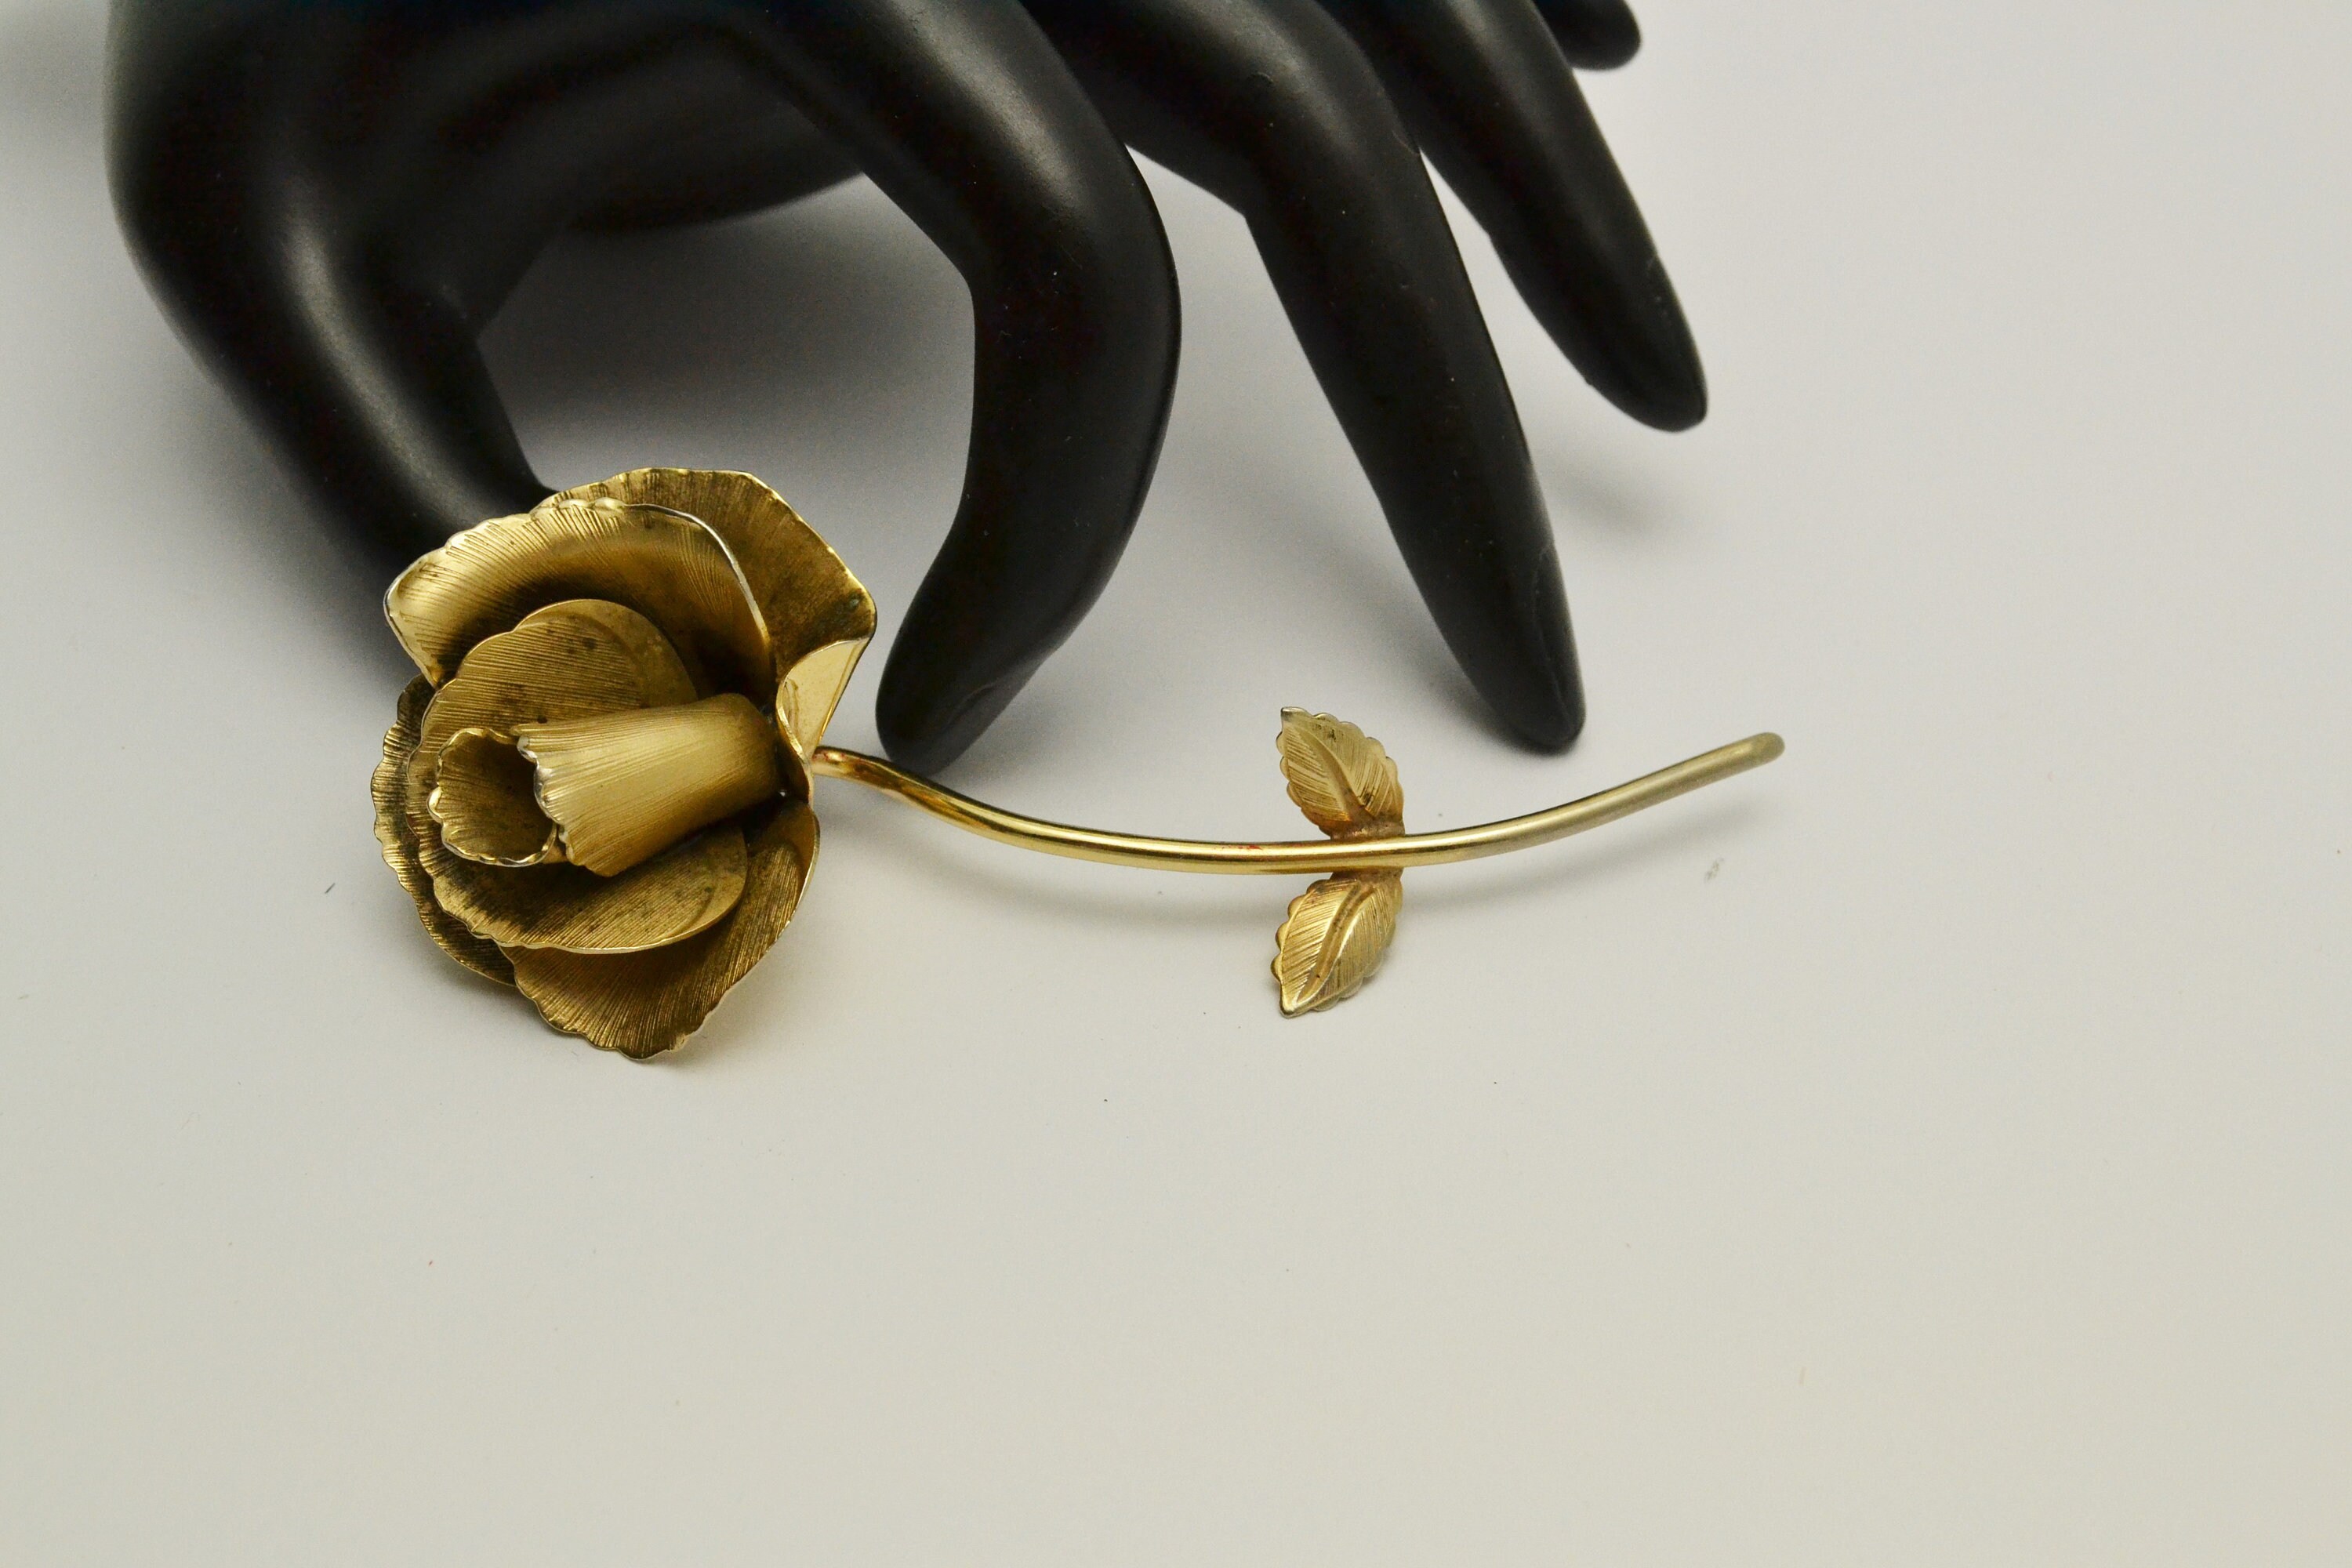 Vintage Giovanni Brooch, Gold Toned Flower Pin, Fancy Antique Jewelry